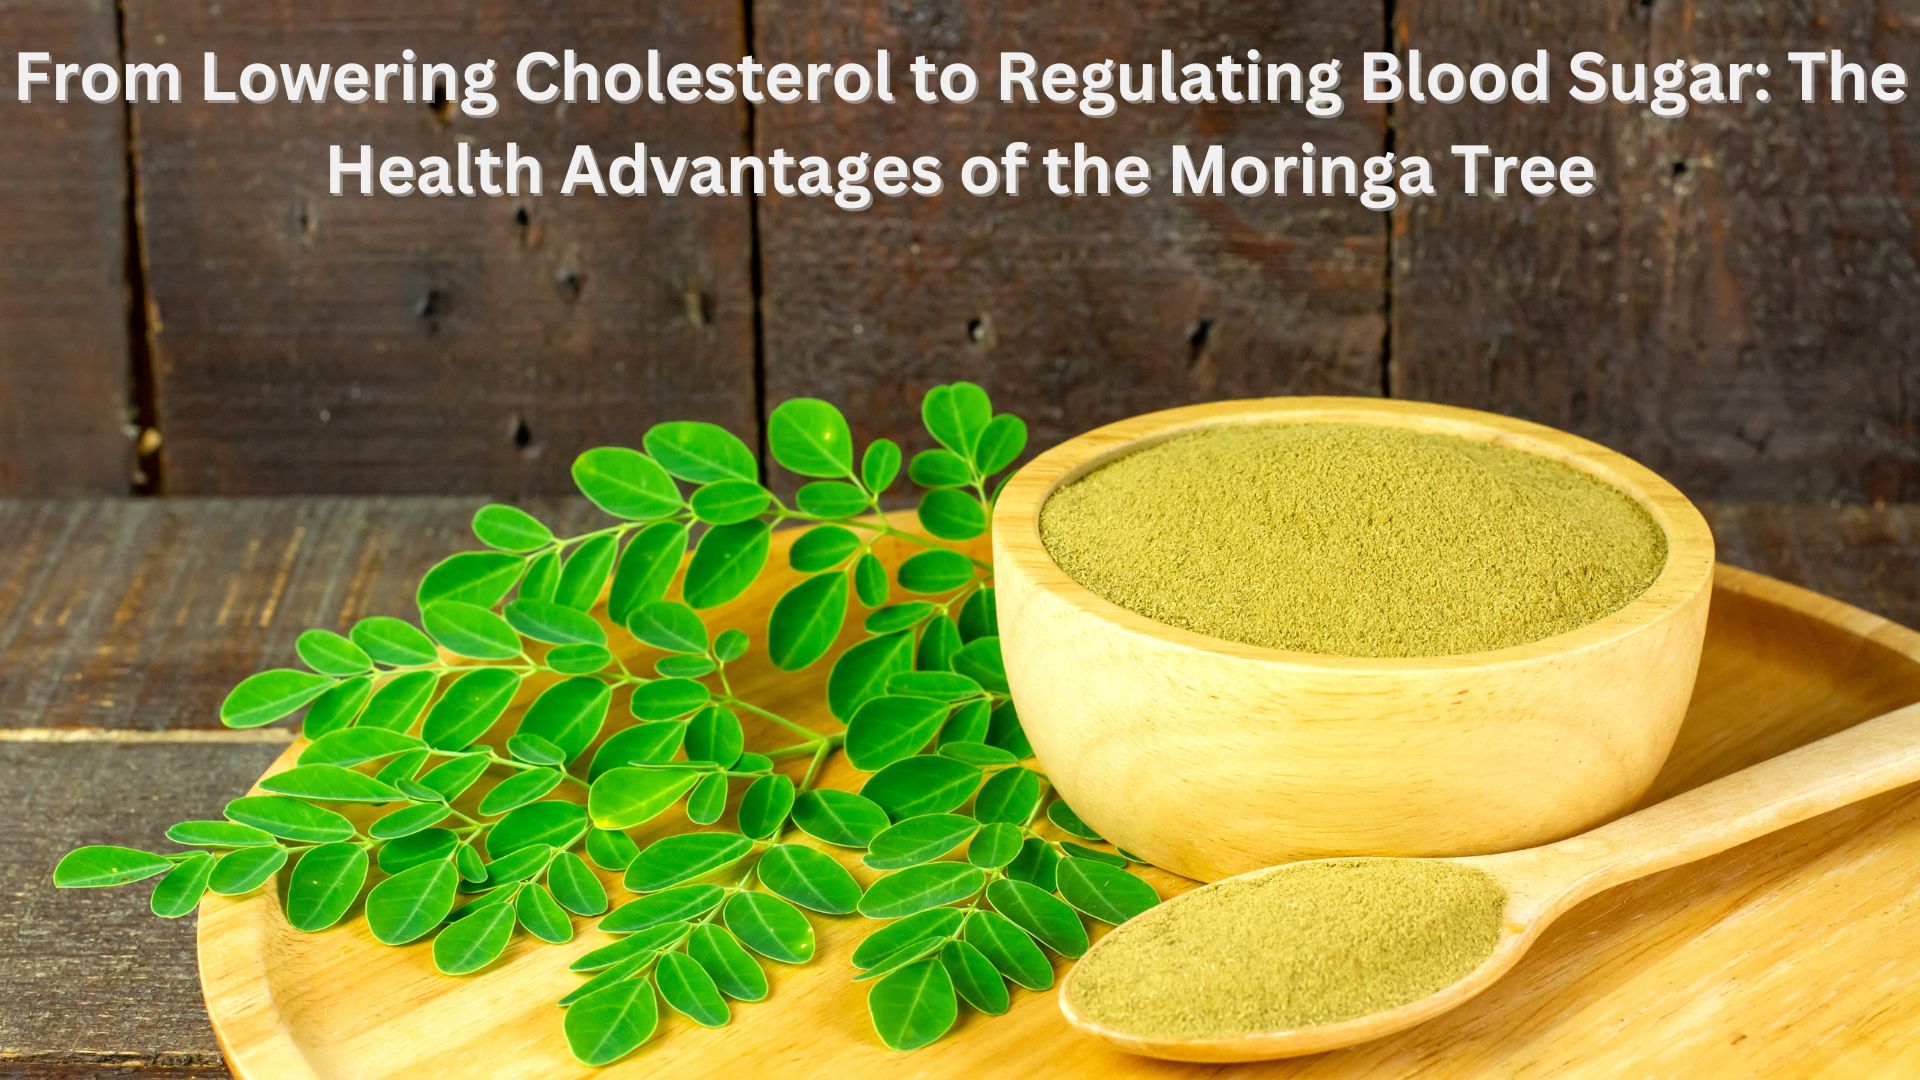 From Lowering Cholesterol to Regulating Blood Sugar: The Health Advantages of the Moringa Tree